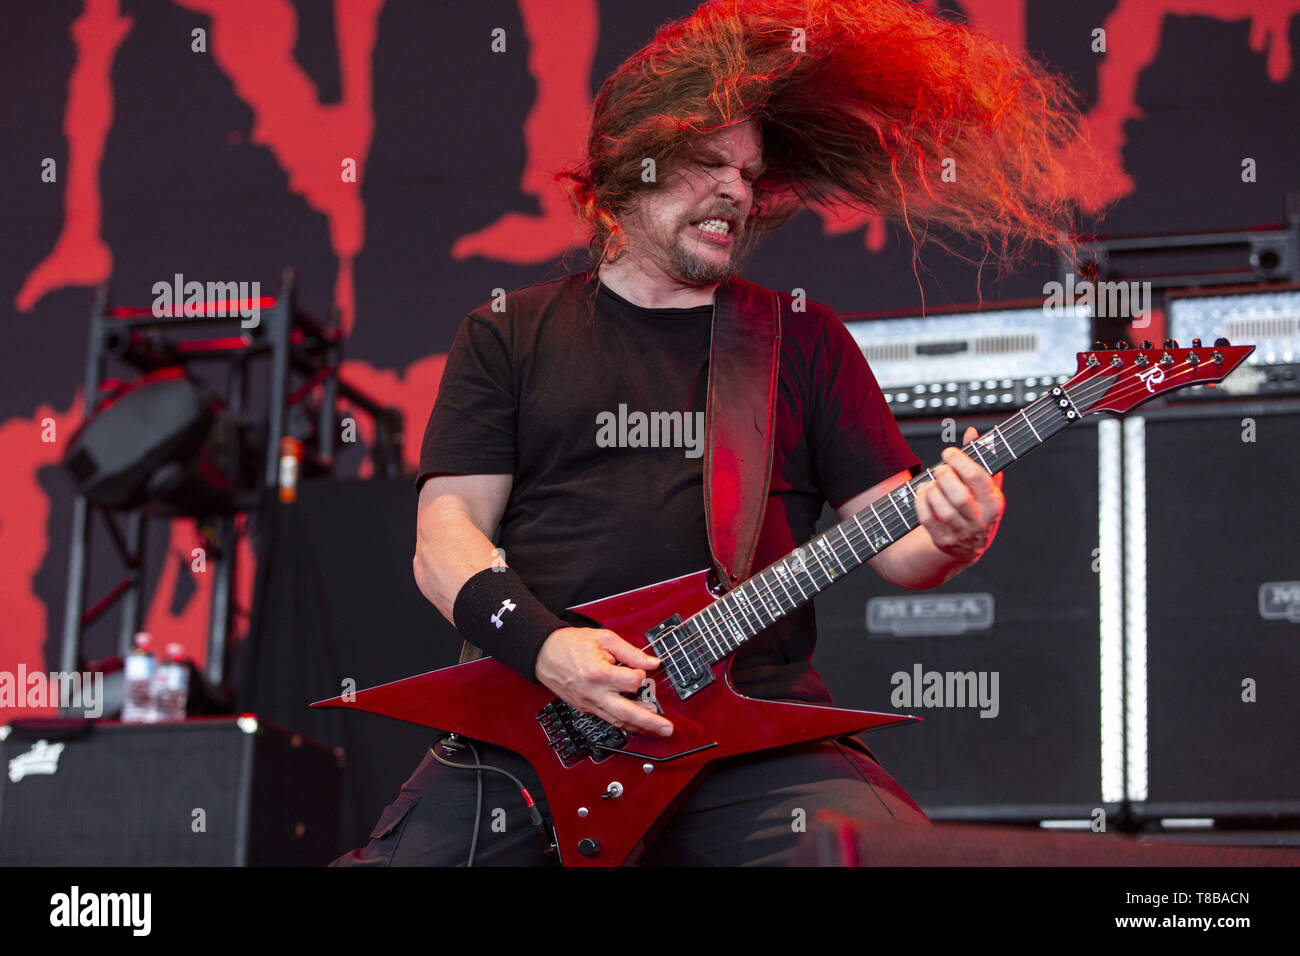 May 11, 2019 - West Palm Beach, Florida, USA - Guitarist ERIK RUTAN of death metal band Cannibal Corpse performs in support of Slayer on their farewell tour. (Credit Image: © Adam DelGiudice/ZUMA Wire) Stock Photo